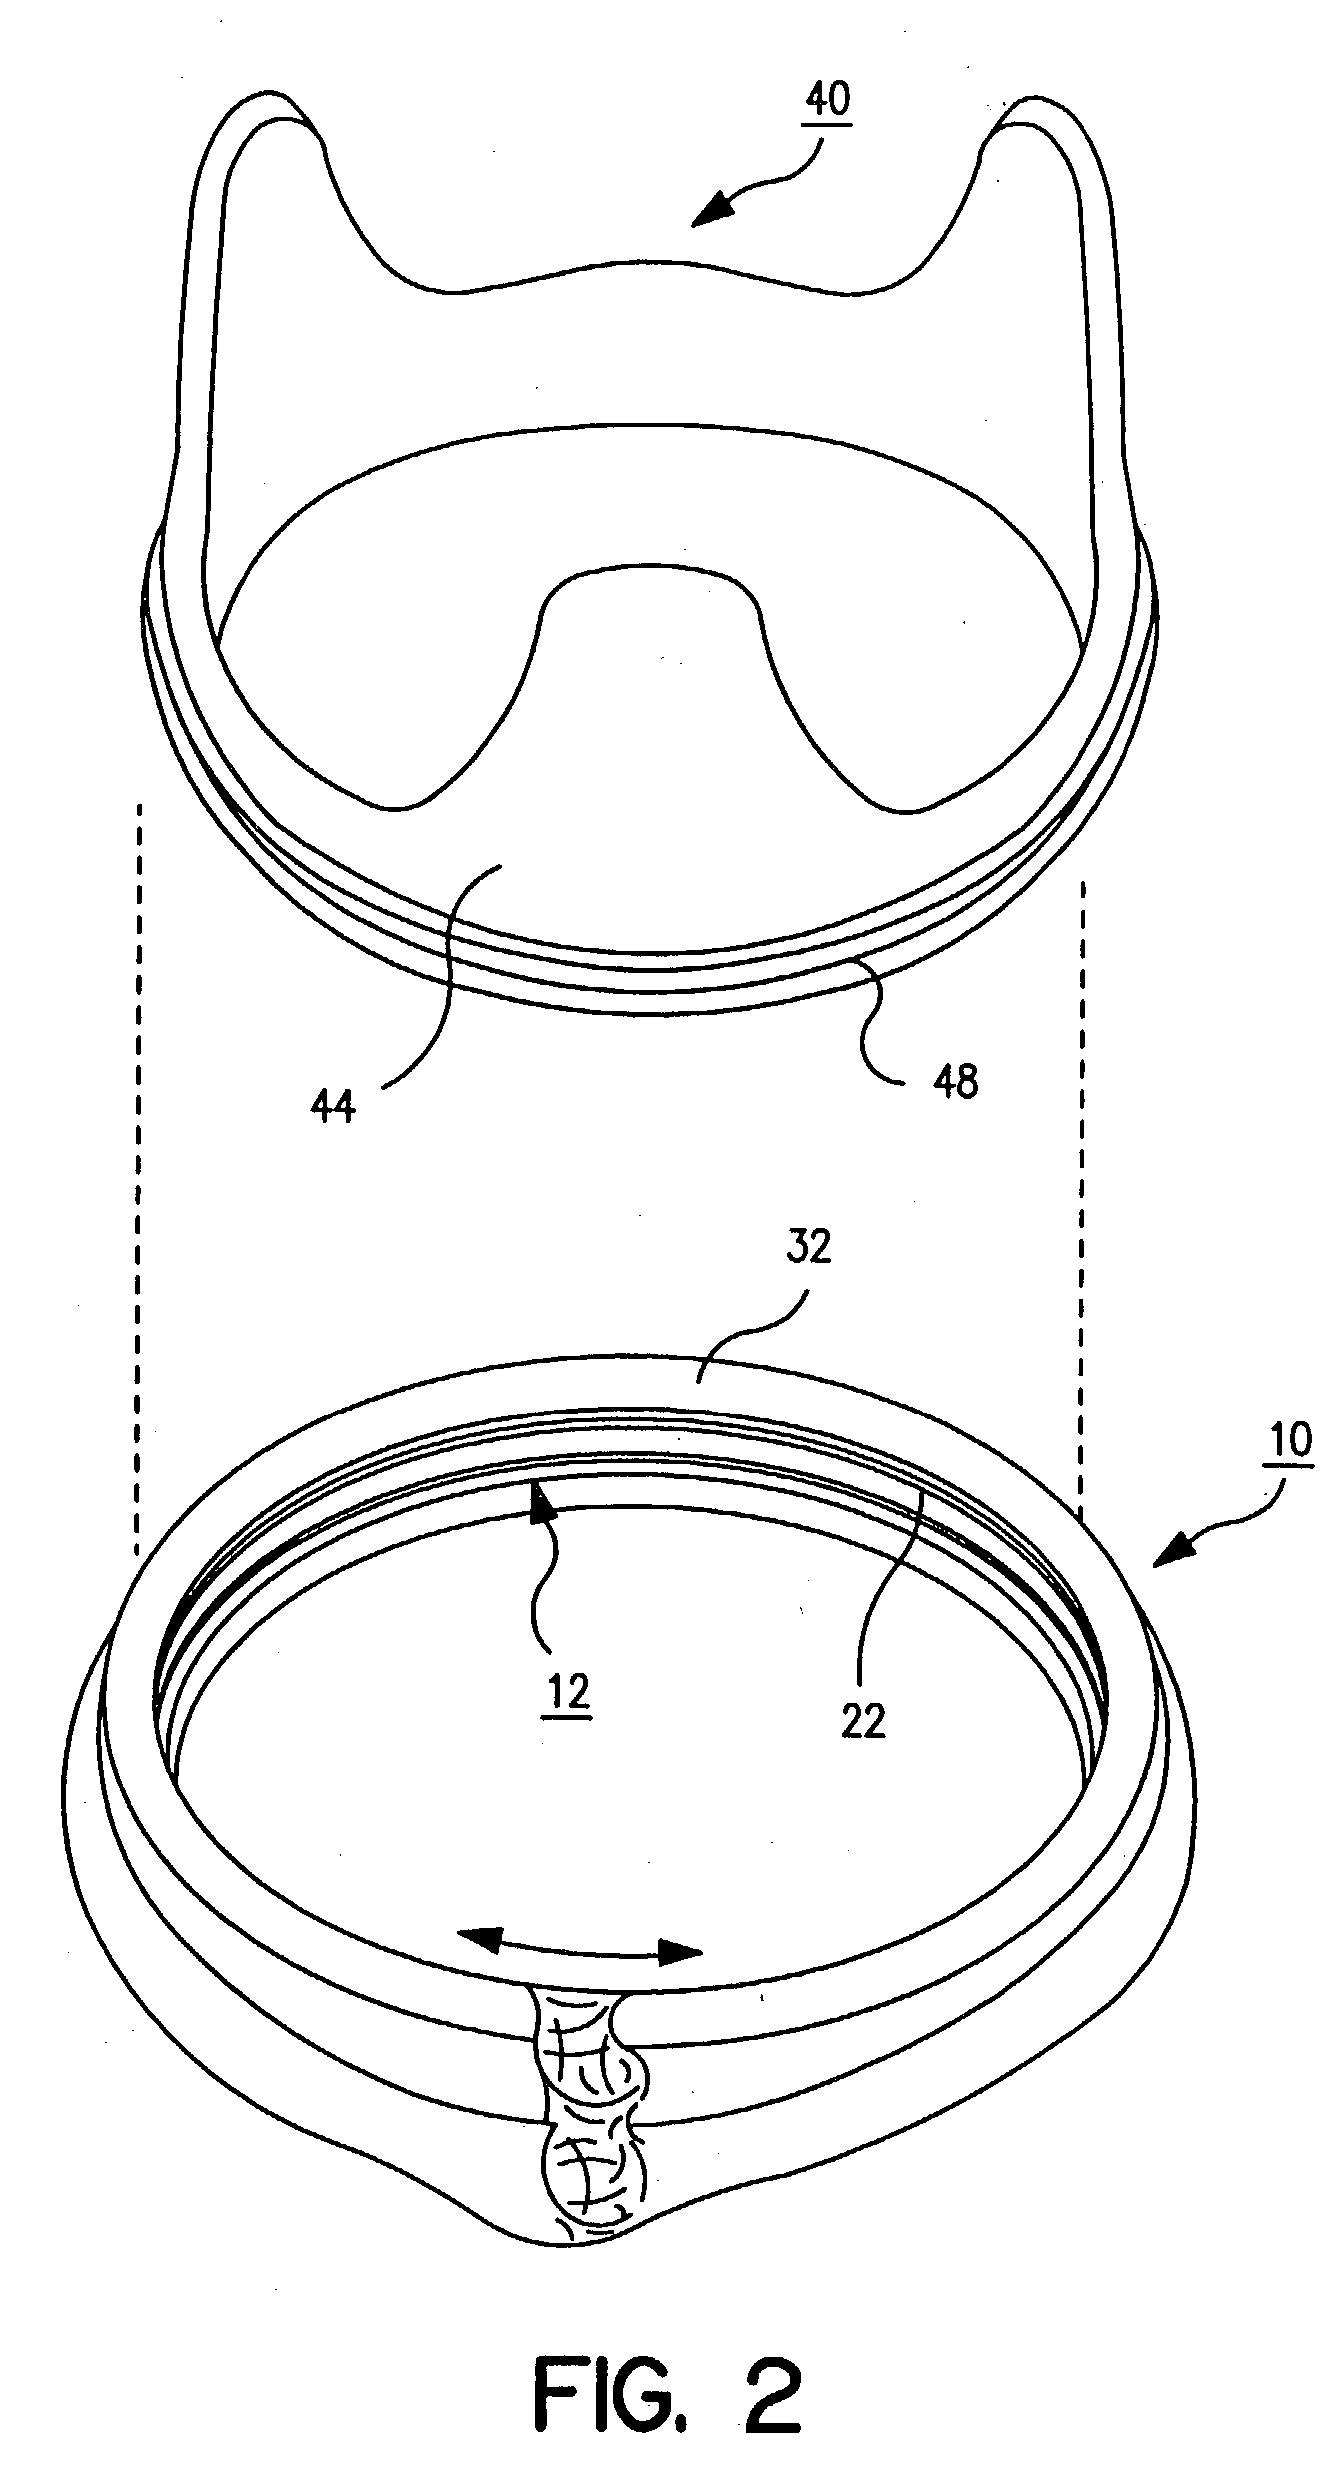 Suturing rings for implantable heart valve prosthesis